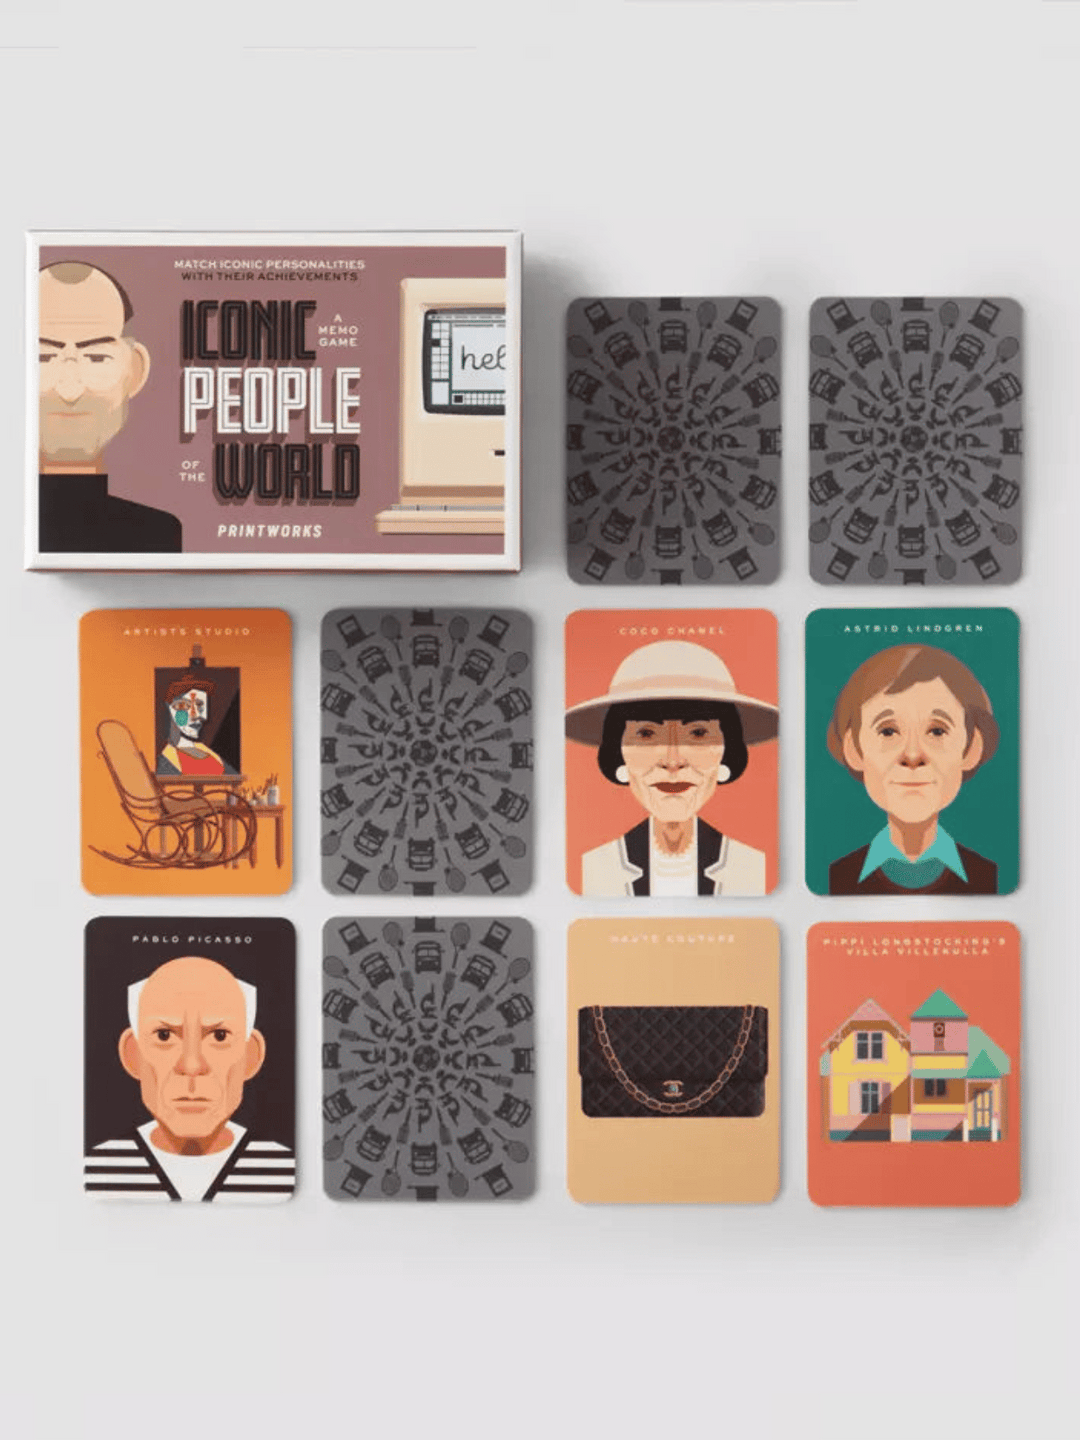 Memory game - Iconic People